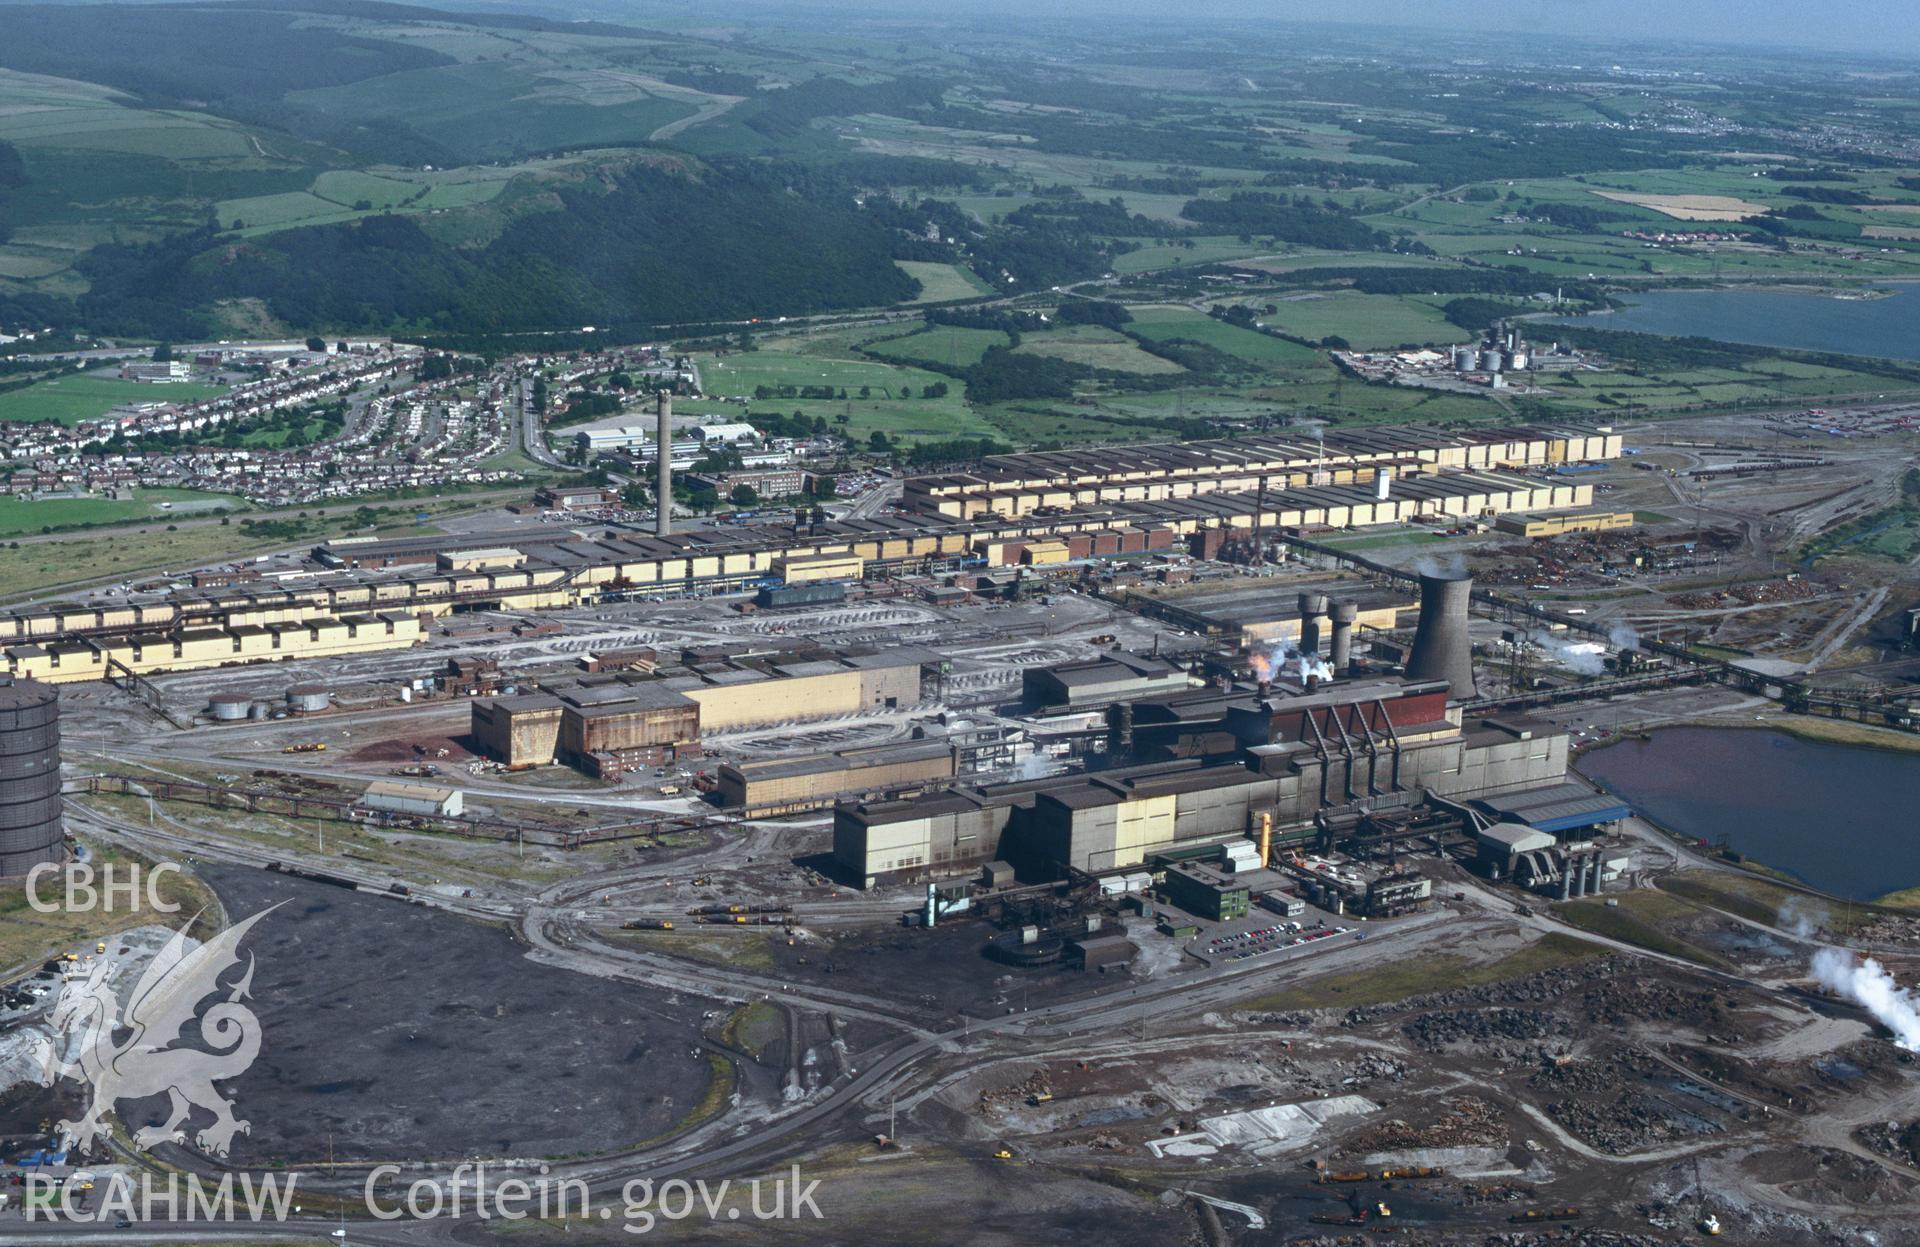 RCAHMW colour oblique aerial photograph of Margam steel works. Taken by C R Musson on 20/07/1995